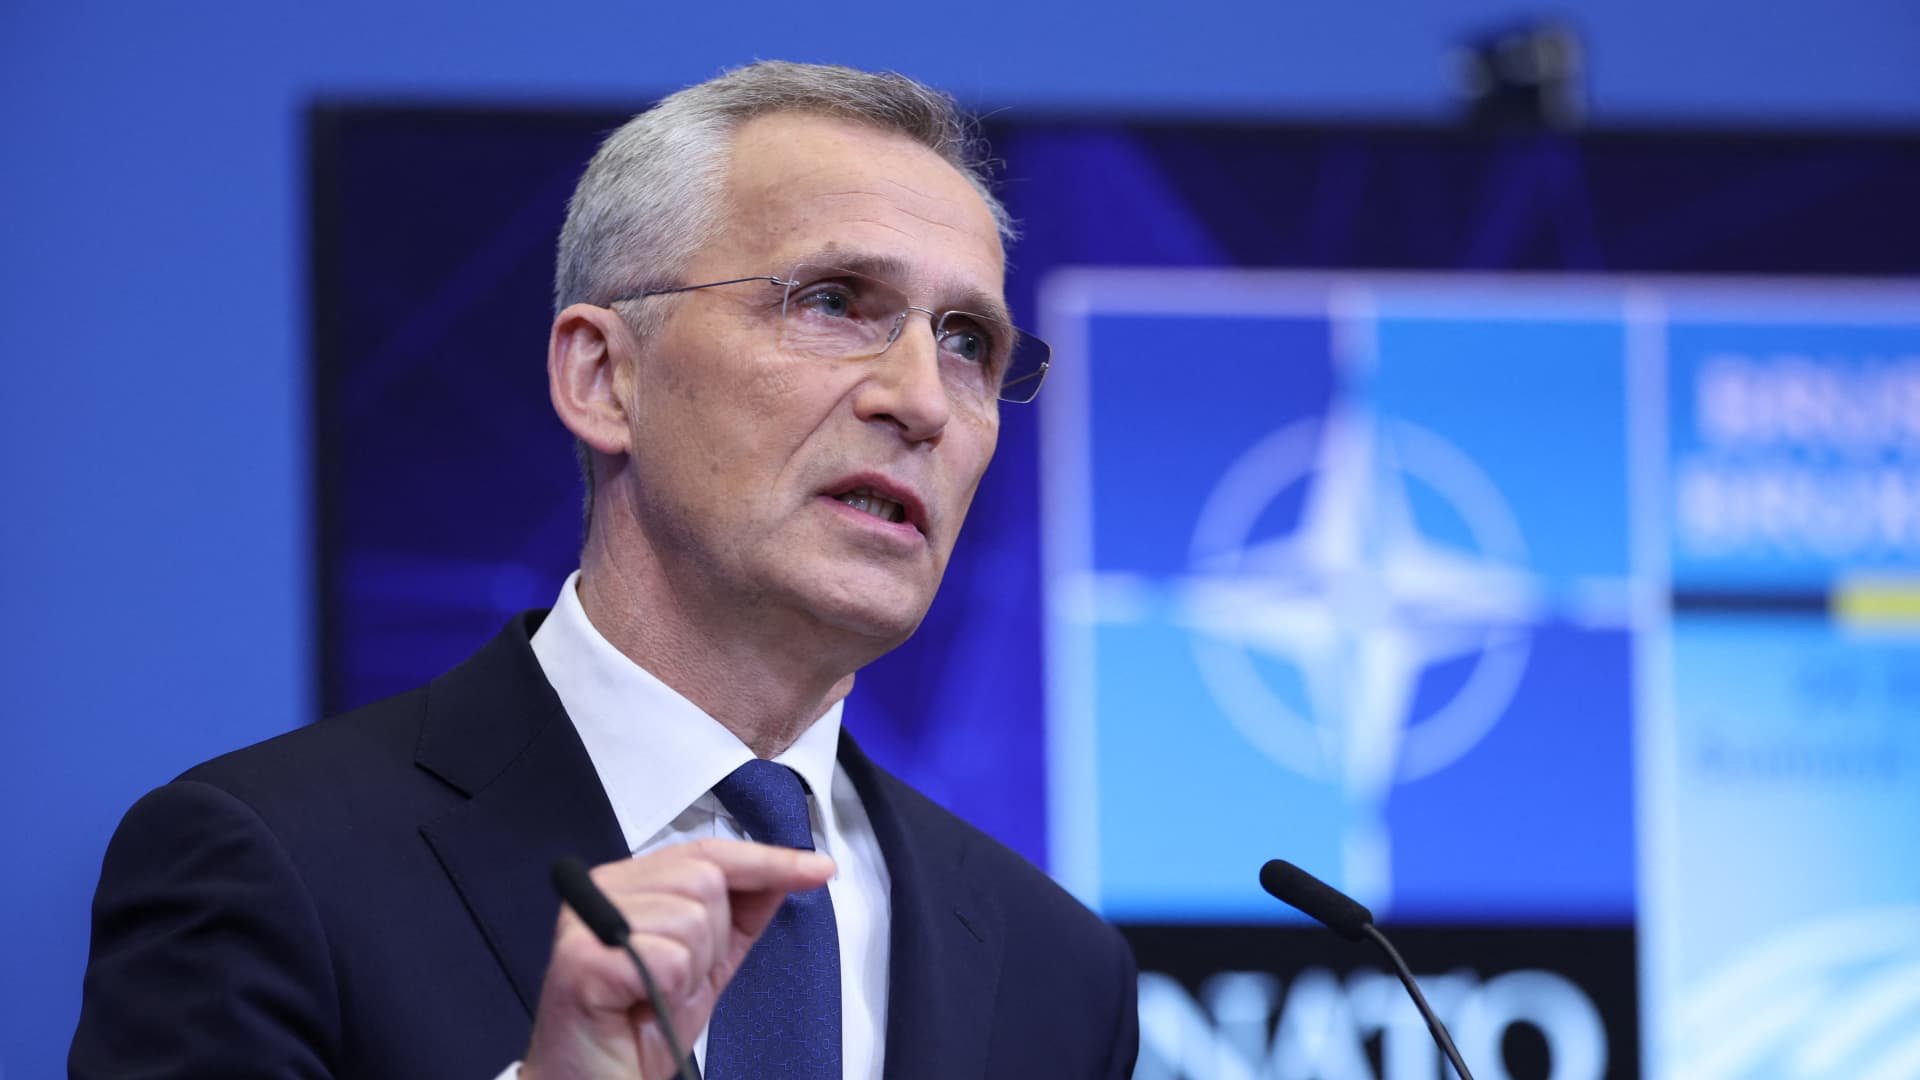 NATO Secretary General Jens Stoltenberg addresses a press conference at NATO Headquarters in Brussels on March 24, 2022.